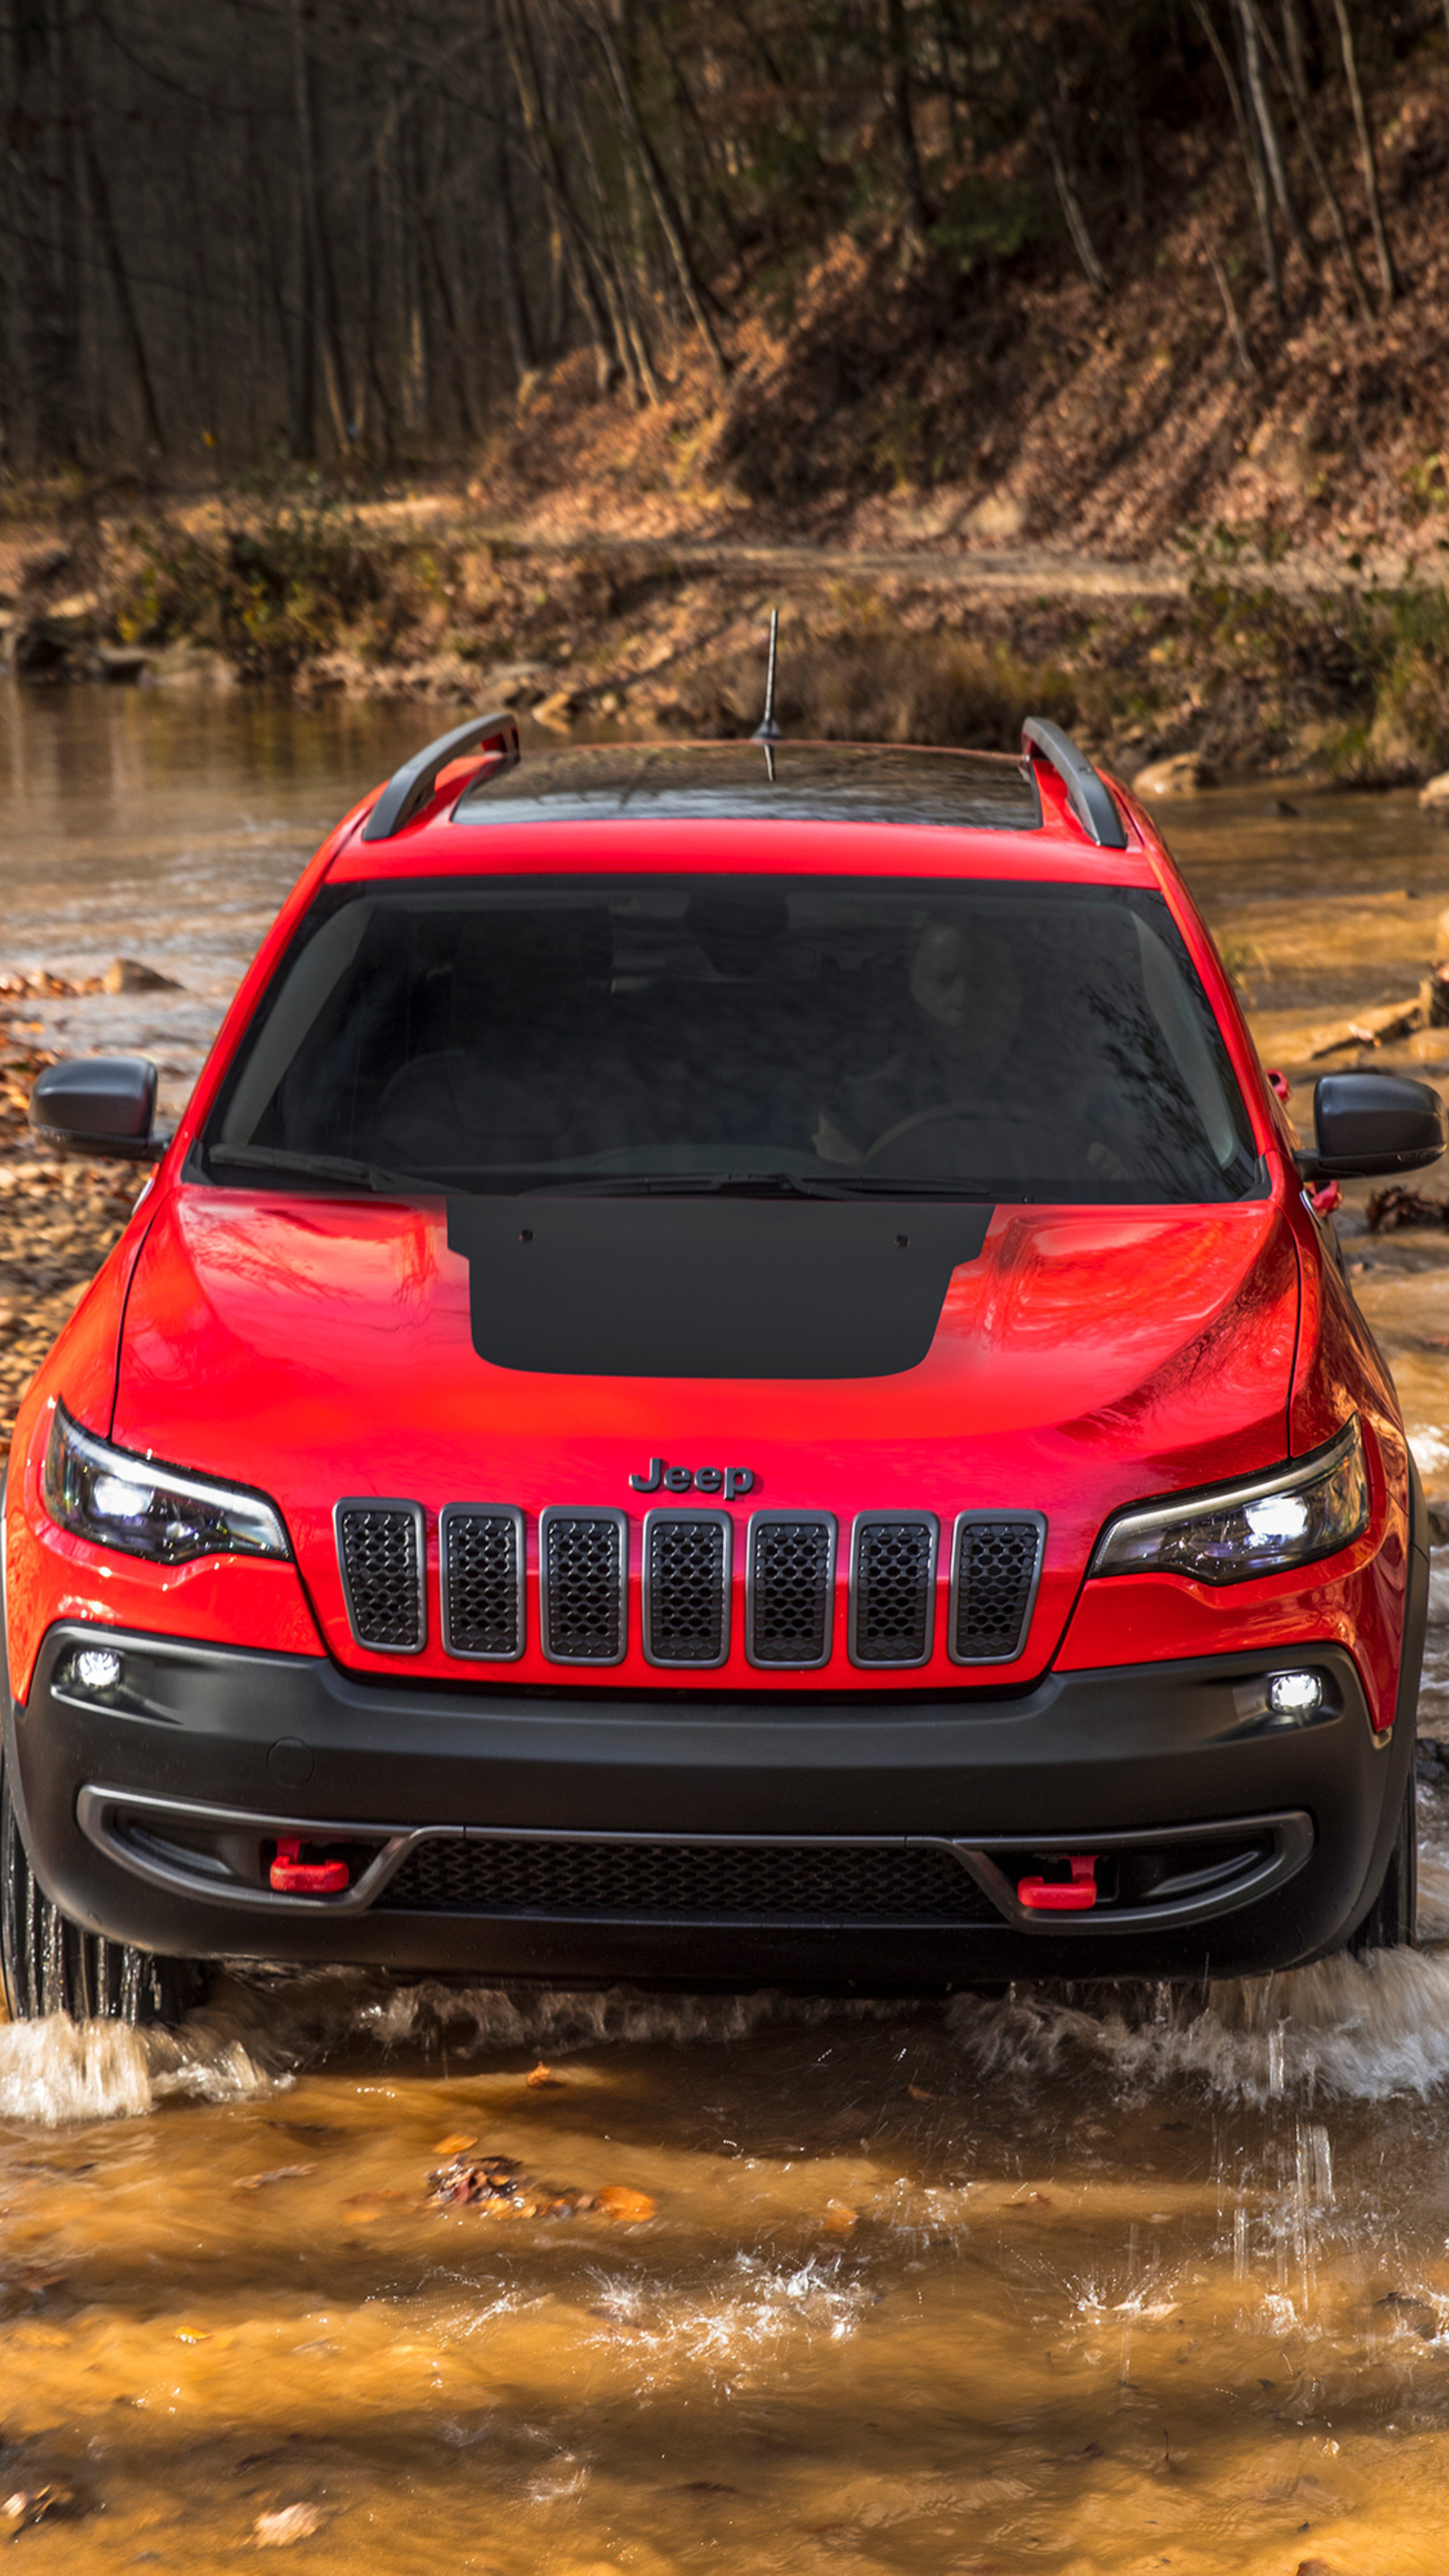 Jeep Cherokee, Trailhawk model, Sony Xperia X, 4K images, 2160x3840 4K Phone